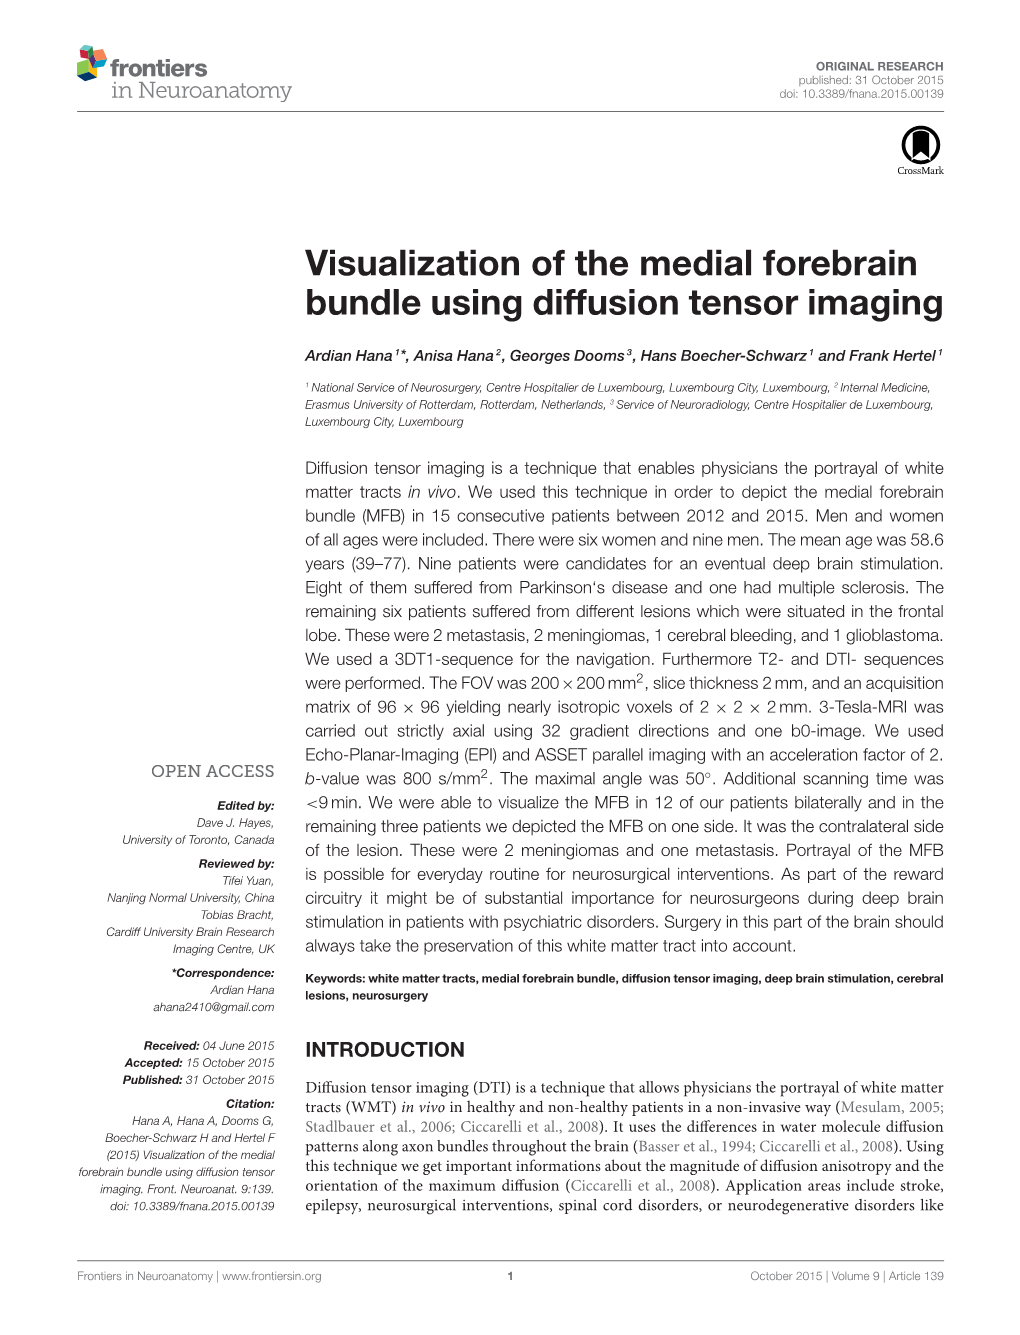 Visualization of the Medial Forebrain Bundle Using Diffusion Tensor Imaging